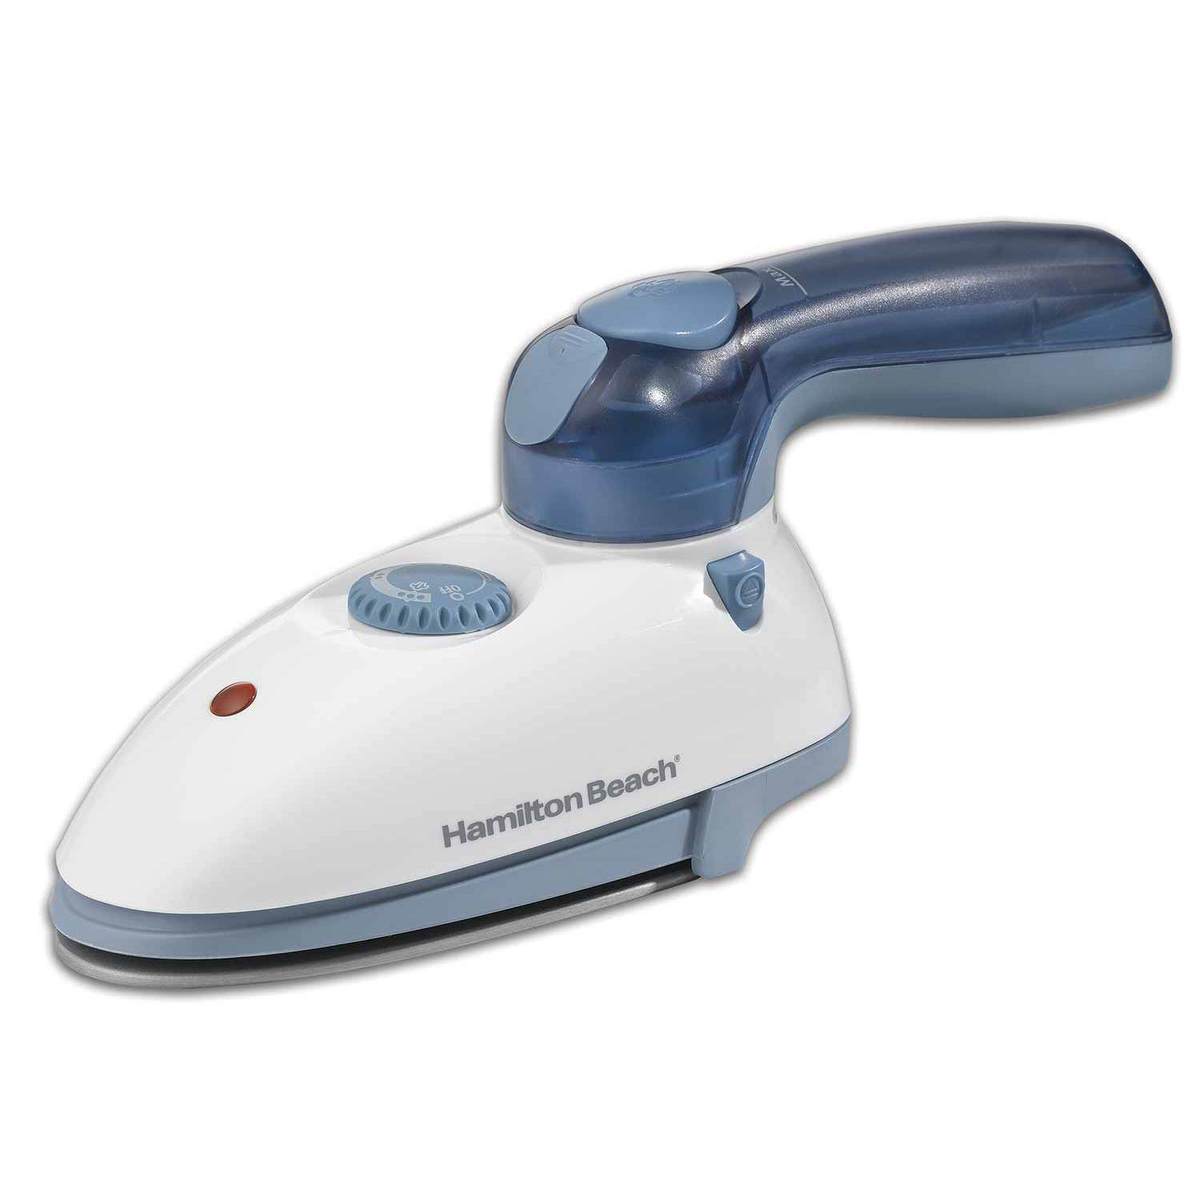 Travel Iron with Steamer (10090)